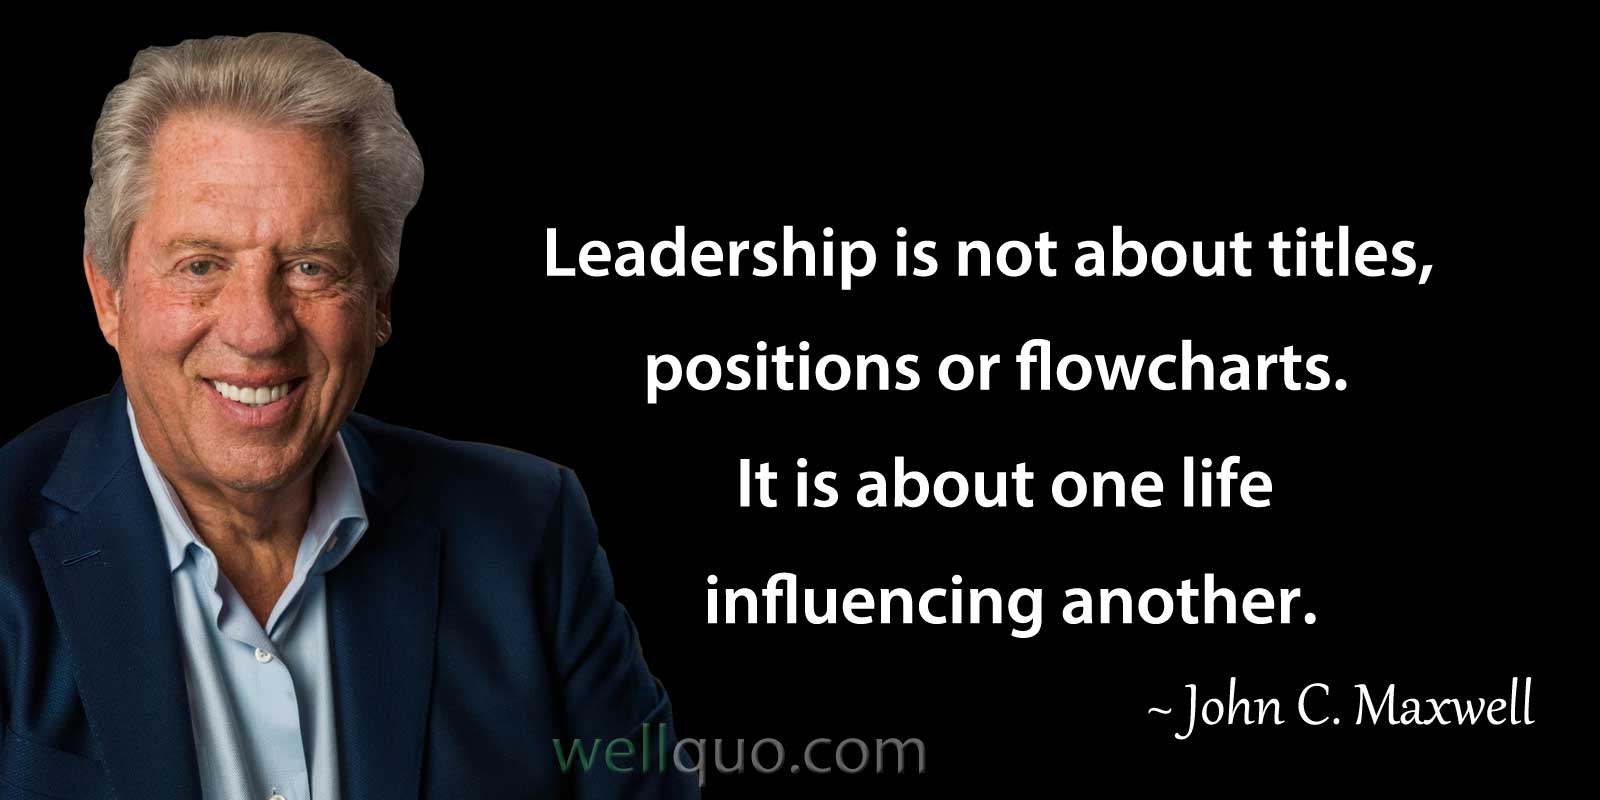 John C Maxwell Inspirational Quotes on Leadership and Achievements - Well Quo